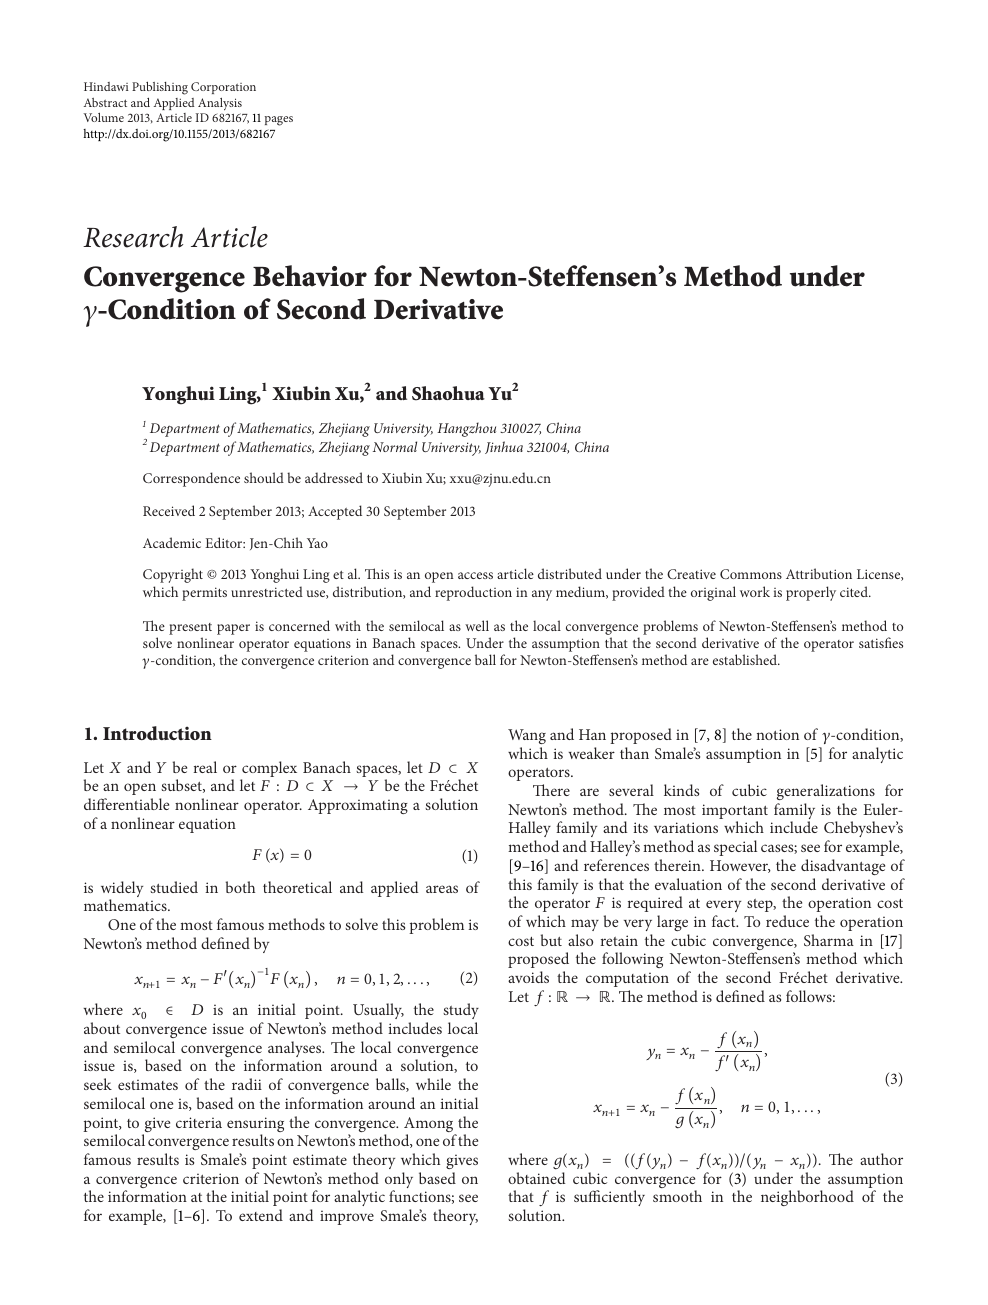 Convergence Behavior For Newton Steffensen S Method Under Condition Of Second Derivative Topic Of Research Paper In Mathematics Download Scholarly Article Pdf And Read For Free On Cyberleninka Open Science Hub